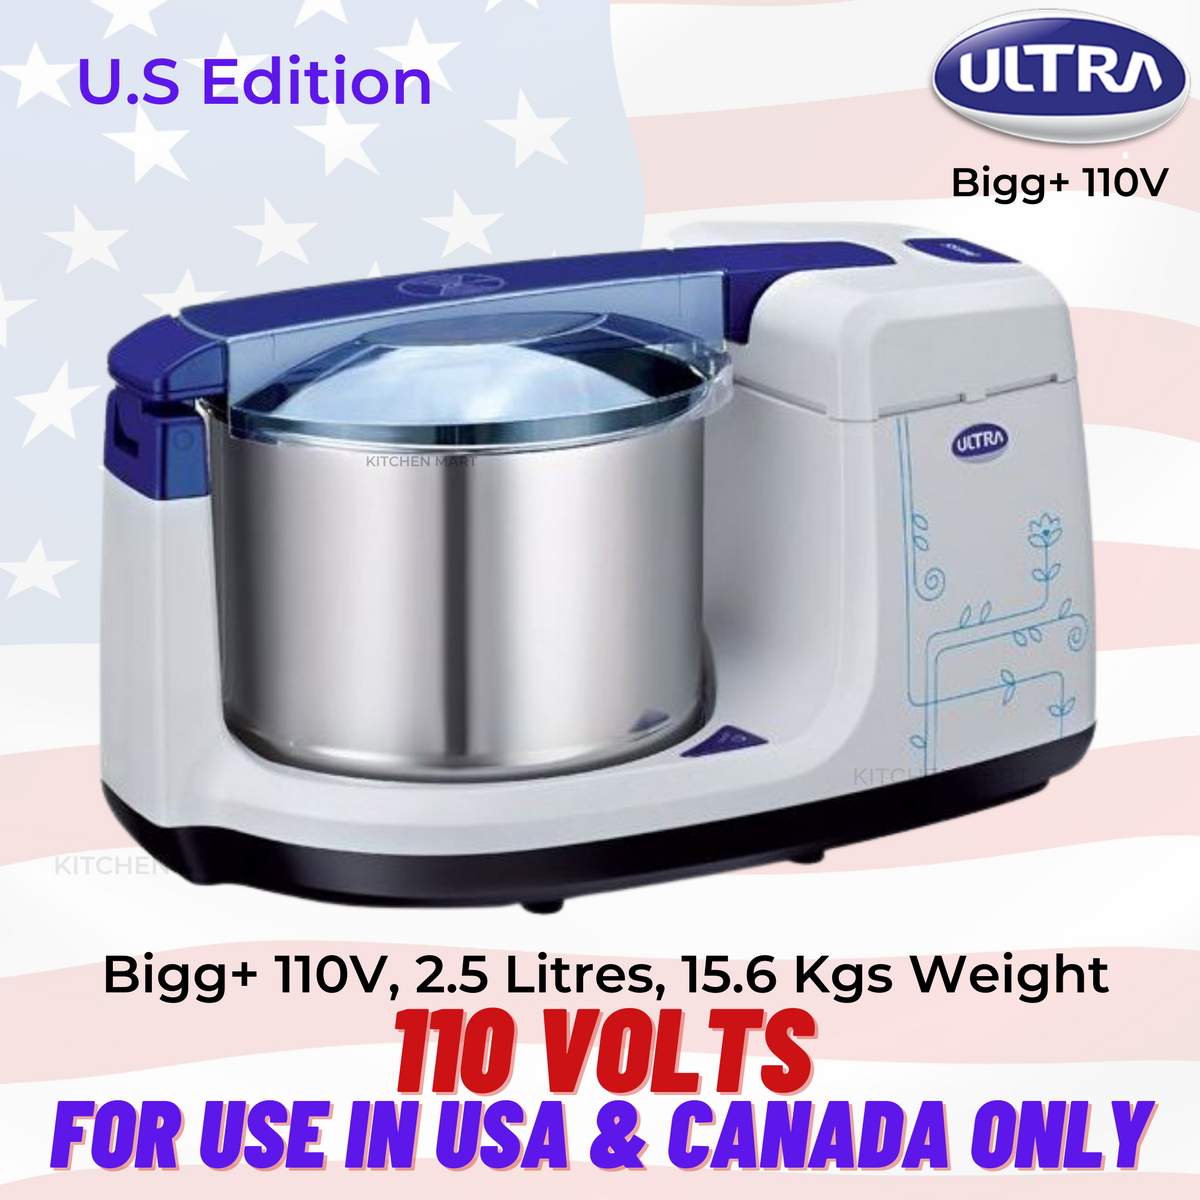 Elgi Ultra Bigg+ Table Top Wet Grinder 2.5 Litres, 110volts for use in USA &amp; Canada